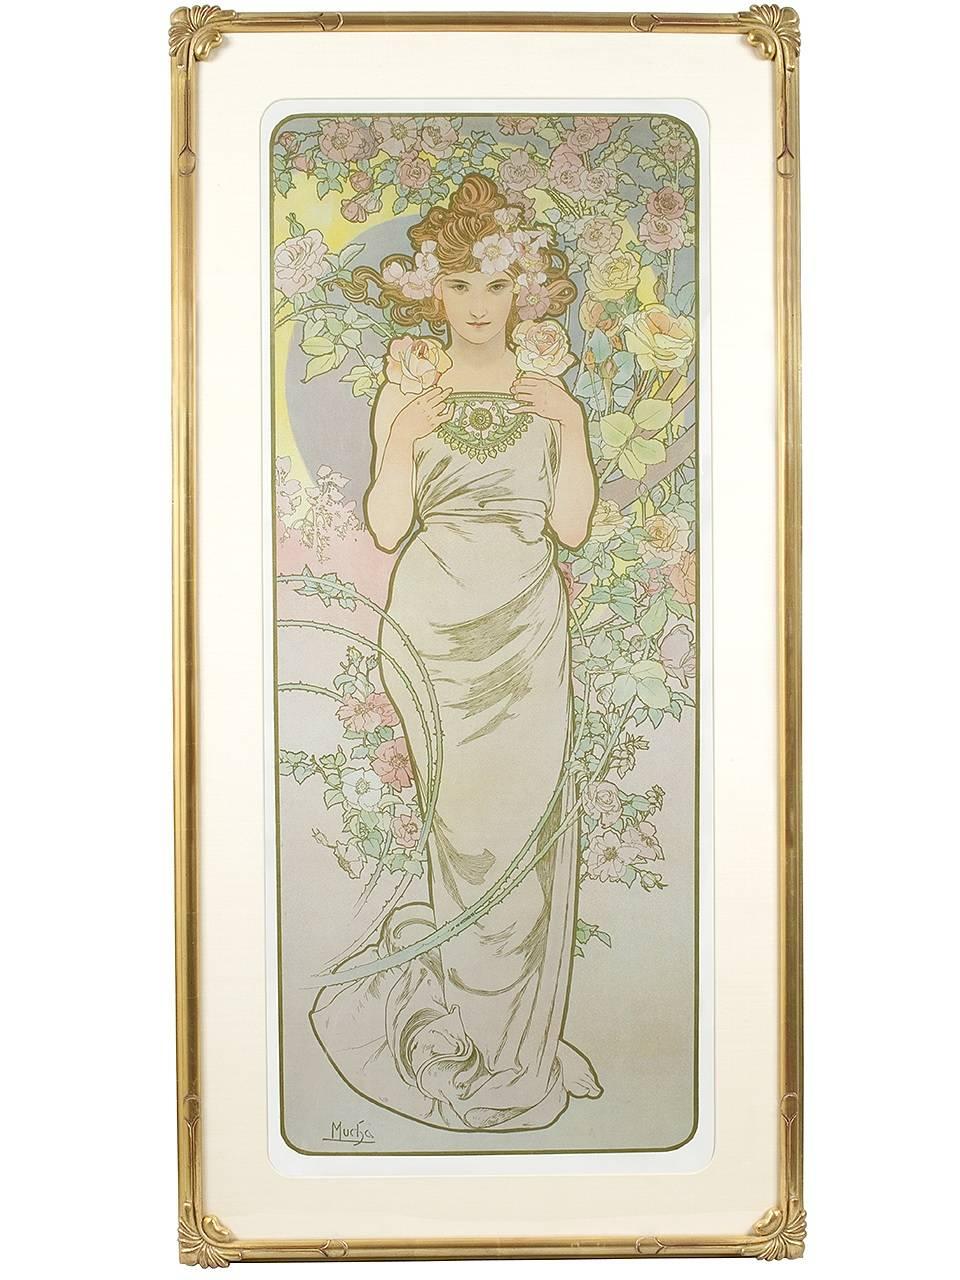 A set of four "Les fleurs" French Art Nouveau lithographs by Alphonse Mucha, printed by F. Champenois, Paris. Each lithograph depicts a different flower; carnation, lily, rose & iris. These four separate lithographs are an original